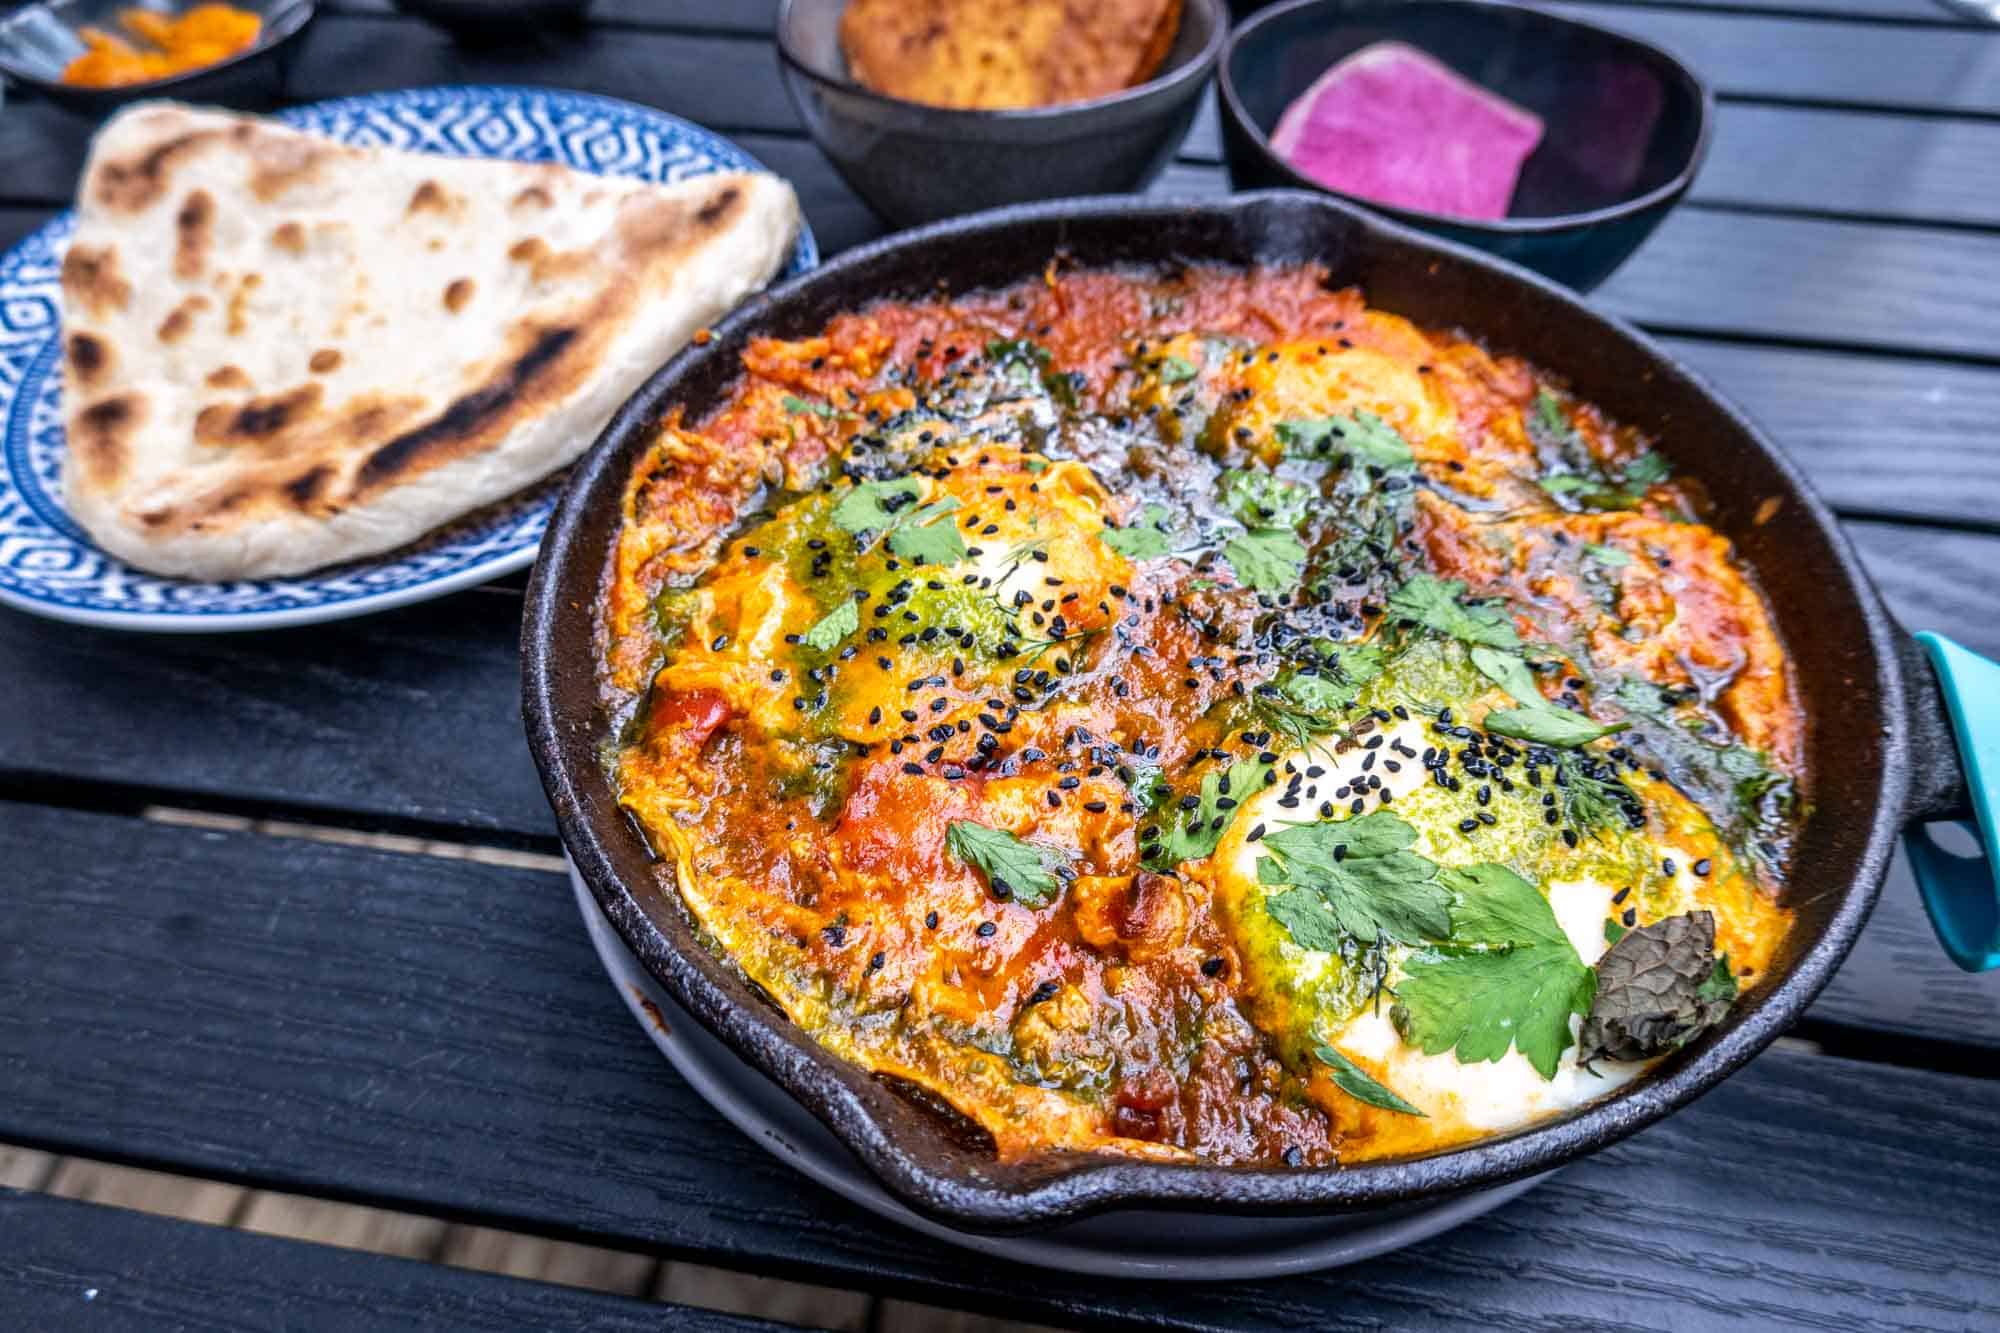 Cast iron skillet filled with shakshuka and eggs beside a flatbread